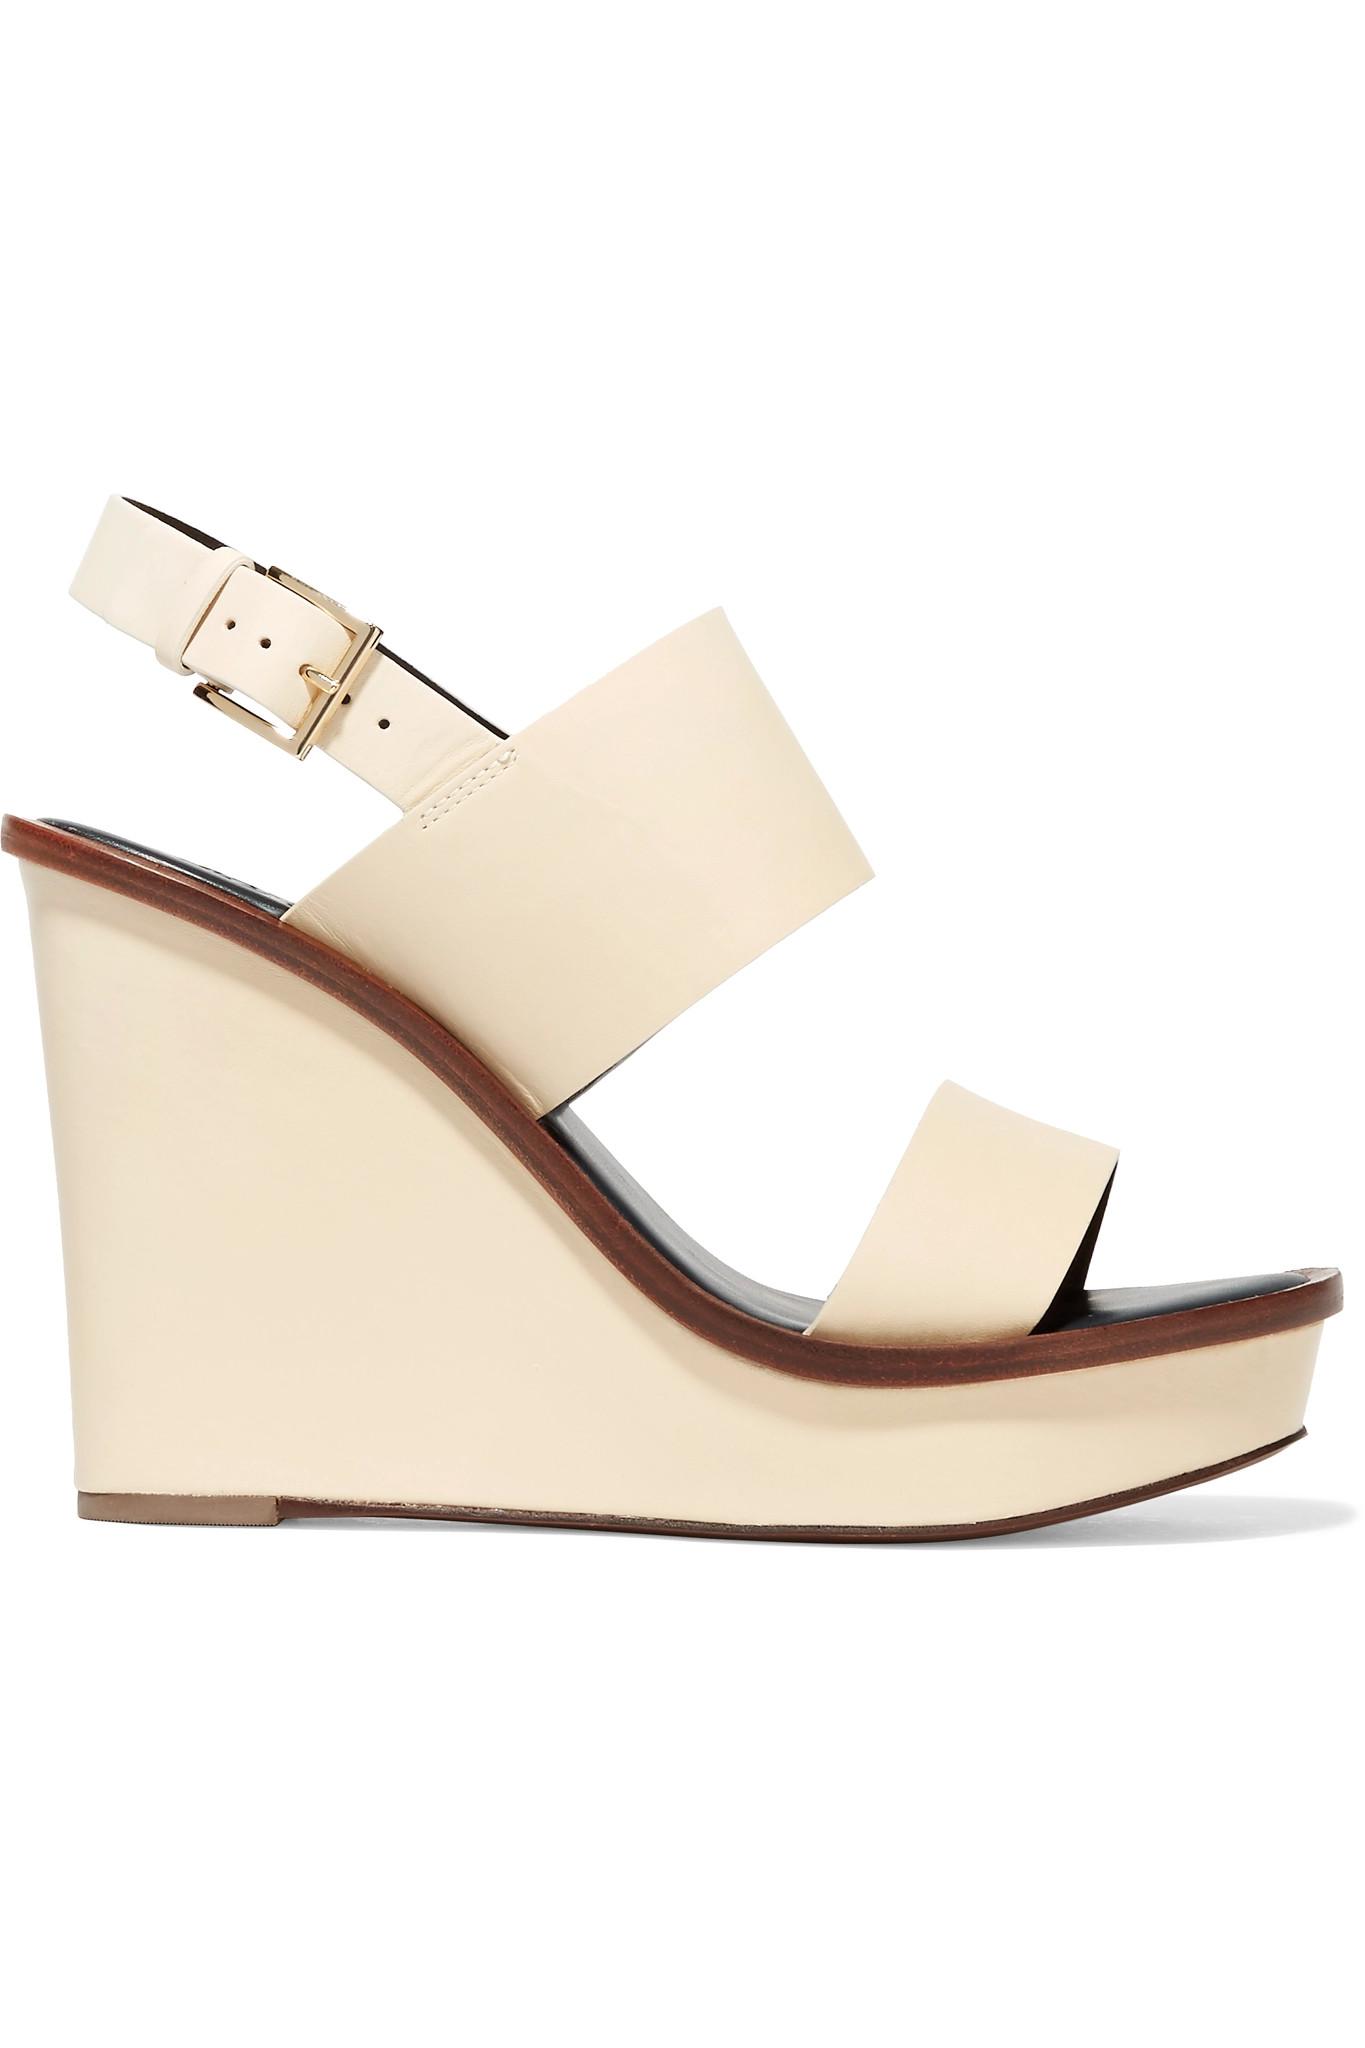 Tory burch Lexington Leather Wedge Sandals in White | Lyst